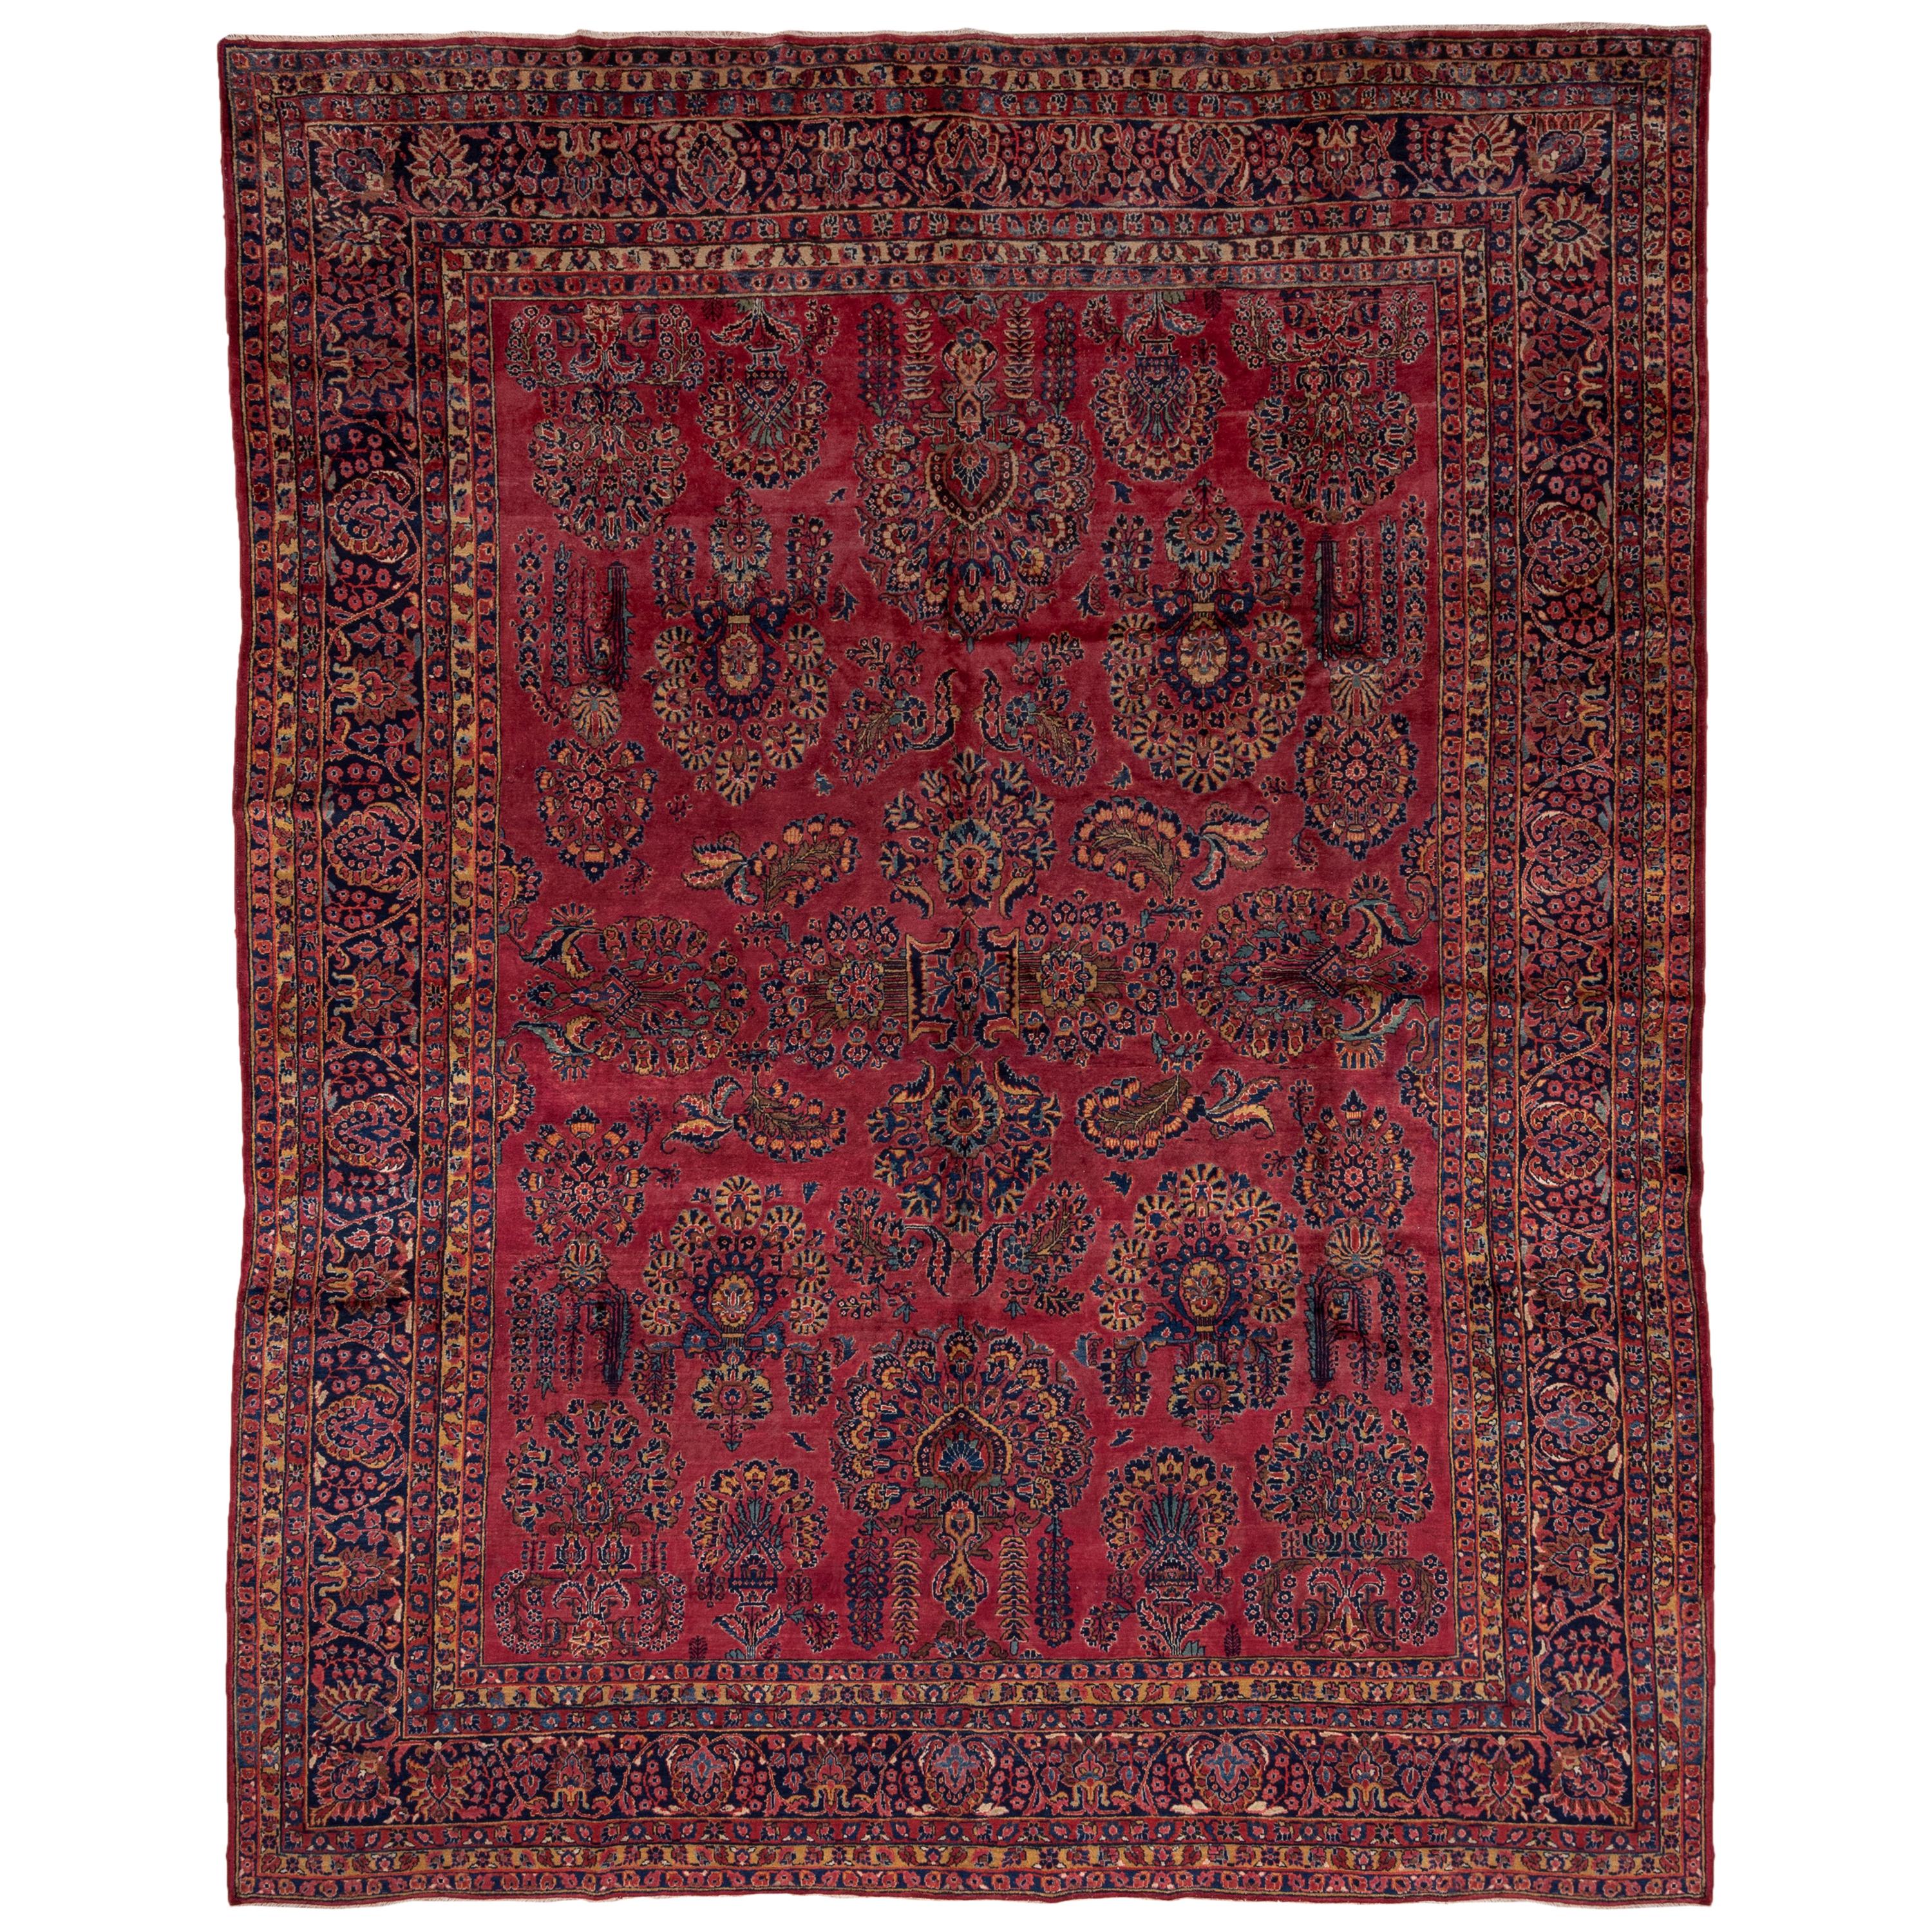 Antique Persian Sarouk Rug, Bright Red Field, Gold and Blue Accents, Medium Pile For Sale